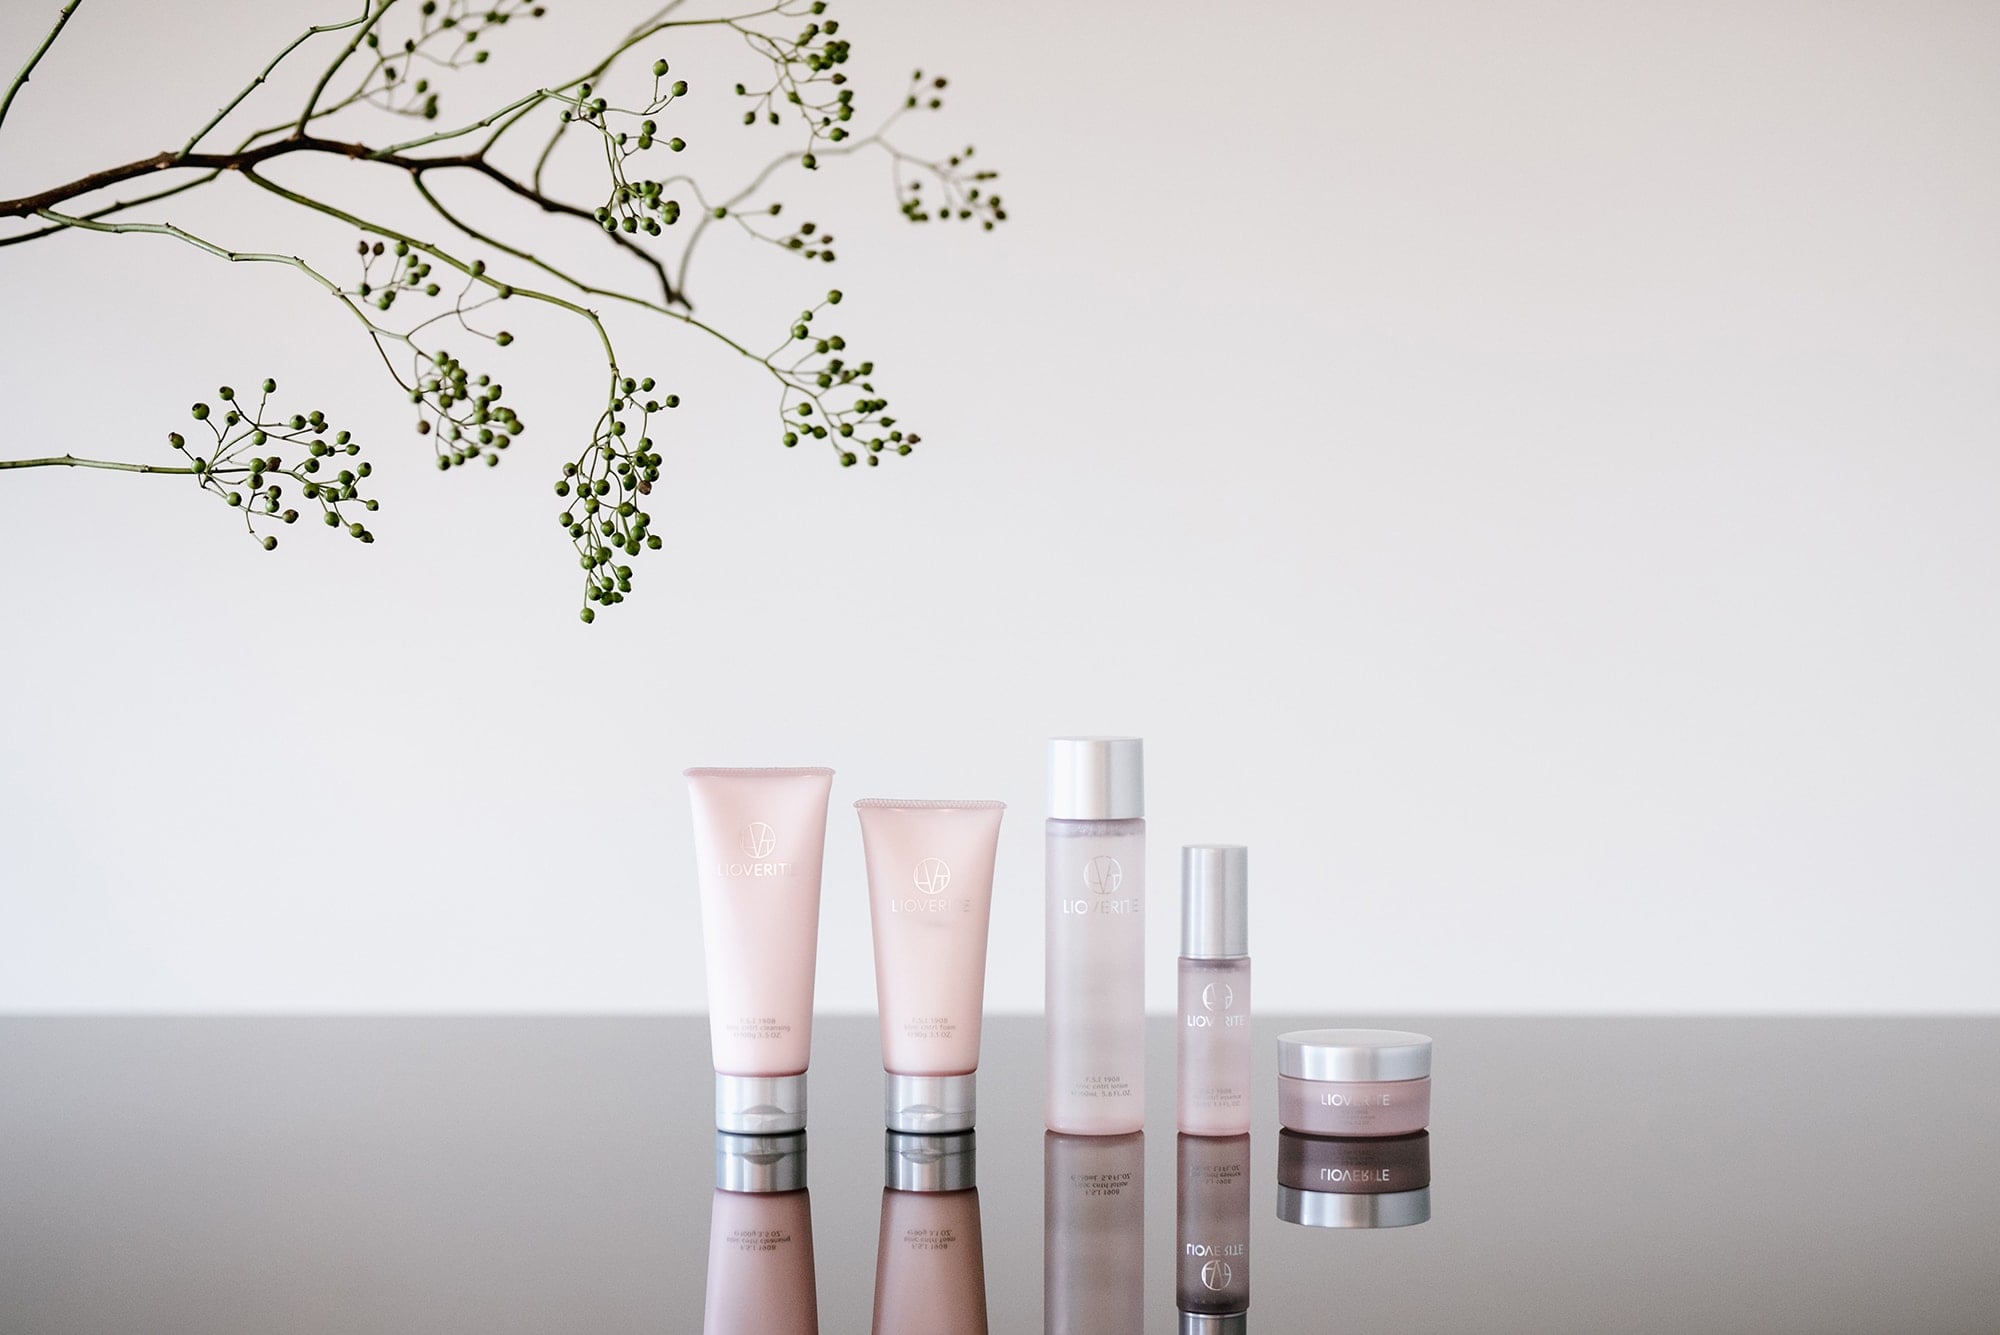  The series are scented with magnolia flowers for base aroma and accented with additional aromas to create a unique aroma experience for each skincare item. The “Balance Control Series” is a set of 5 items from cleansing to facial cream.